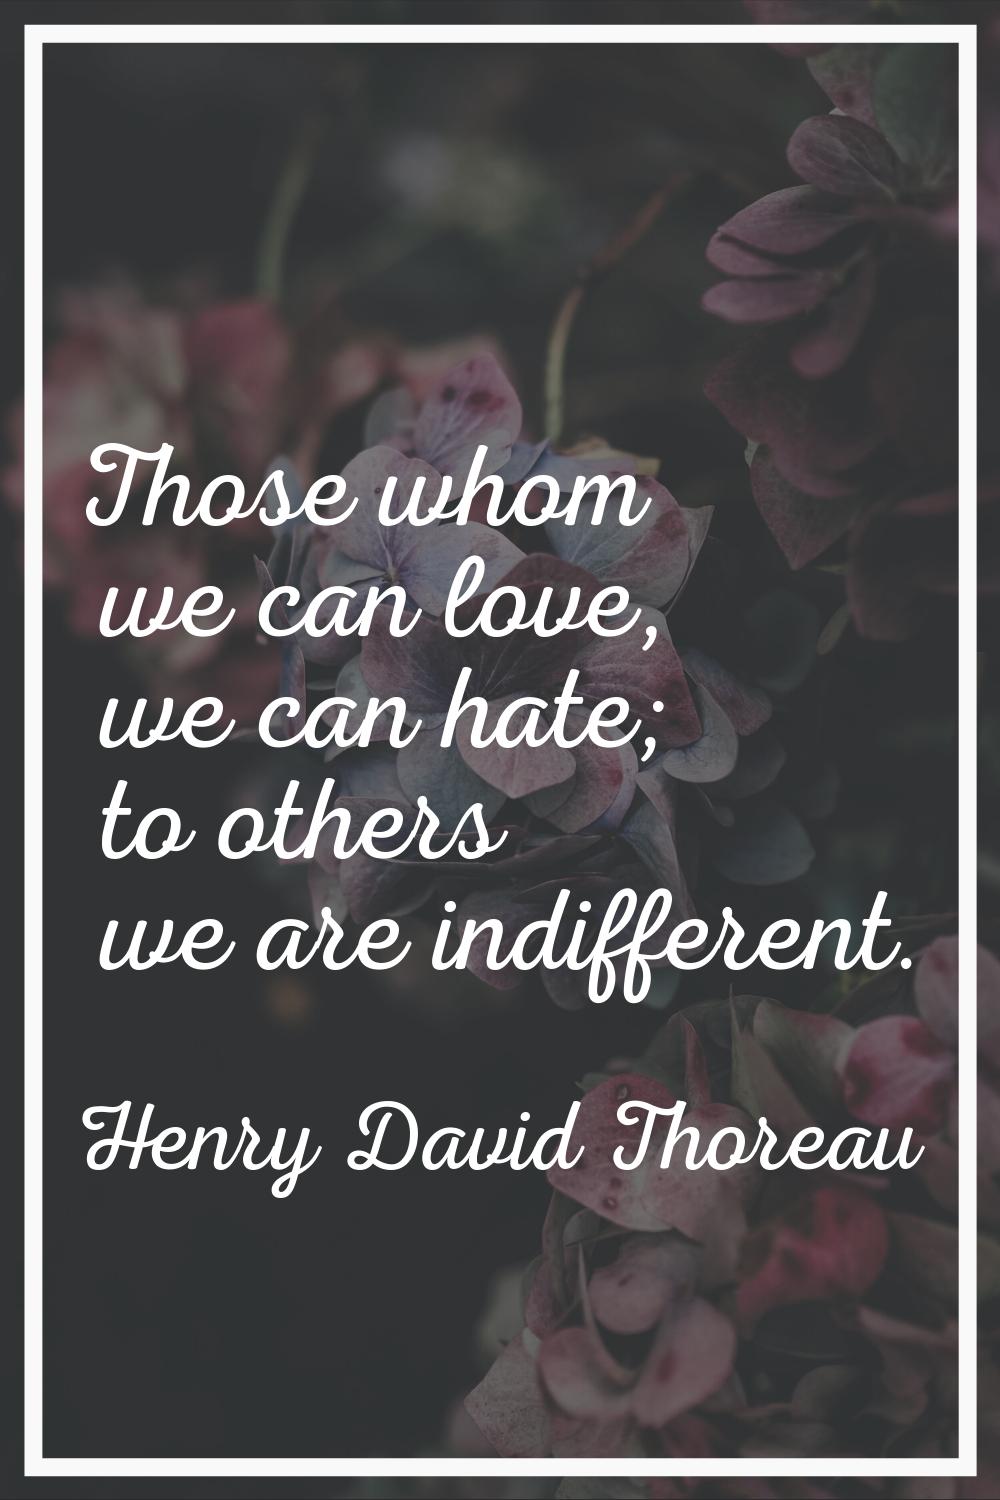 Those whom we can love, we can hate; to others we are indifferent.